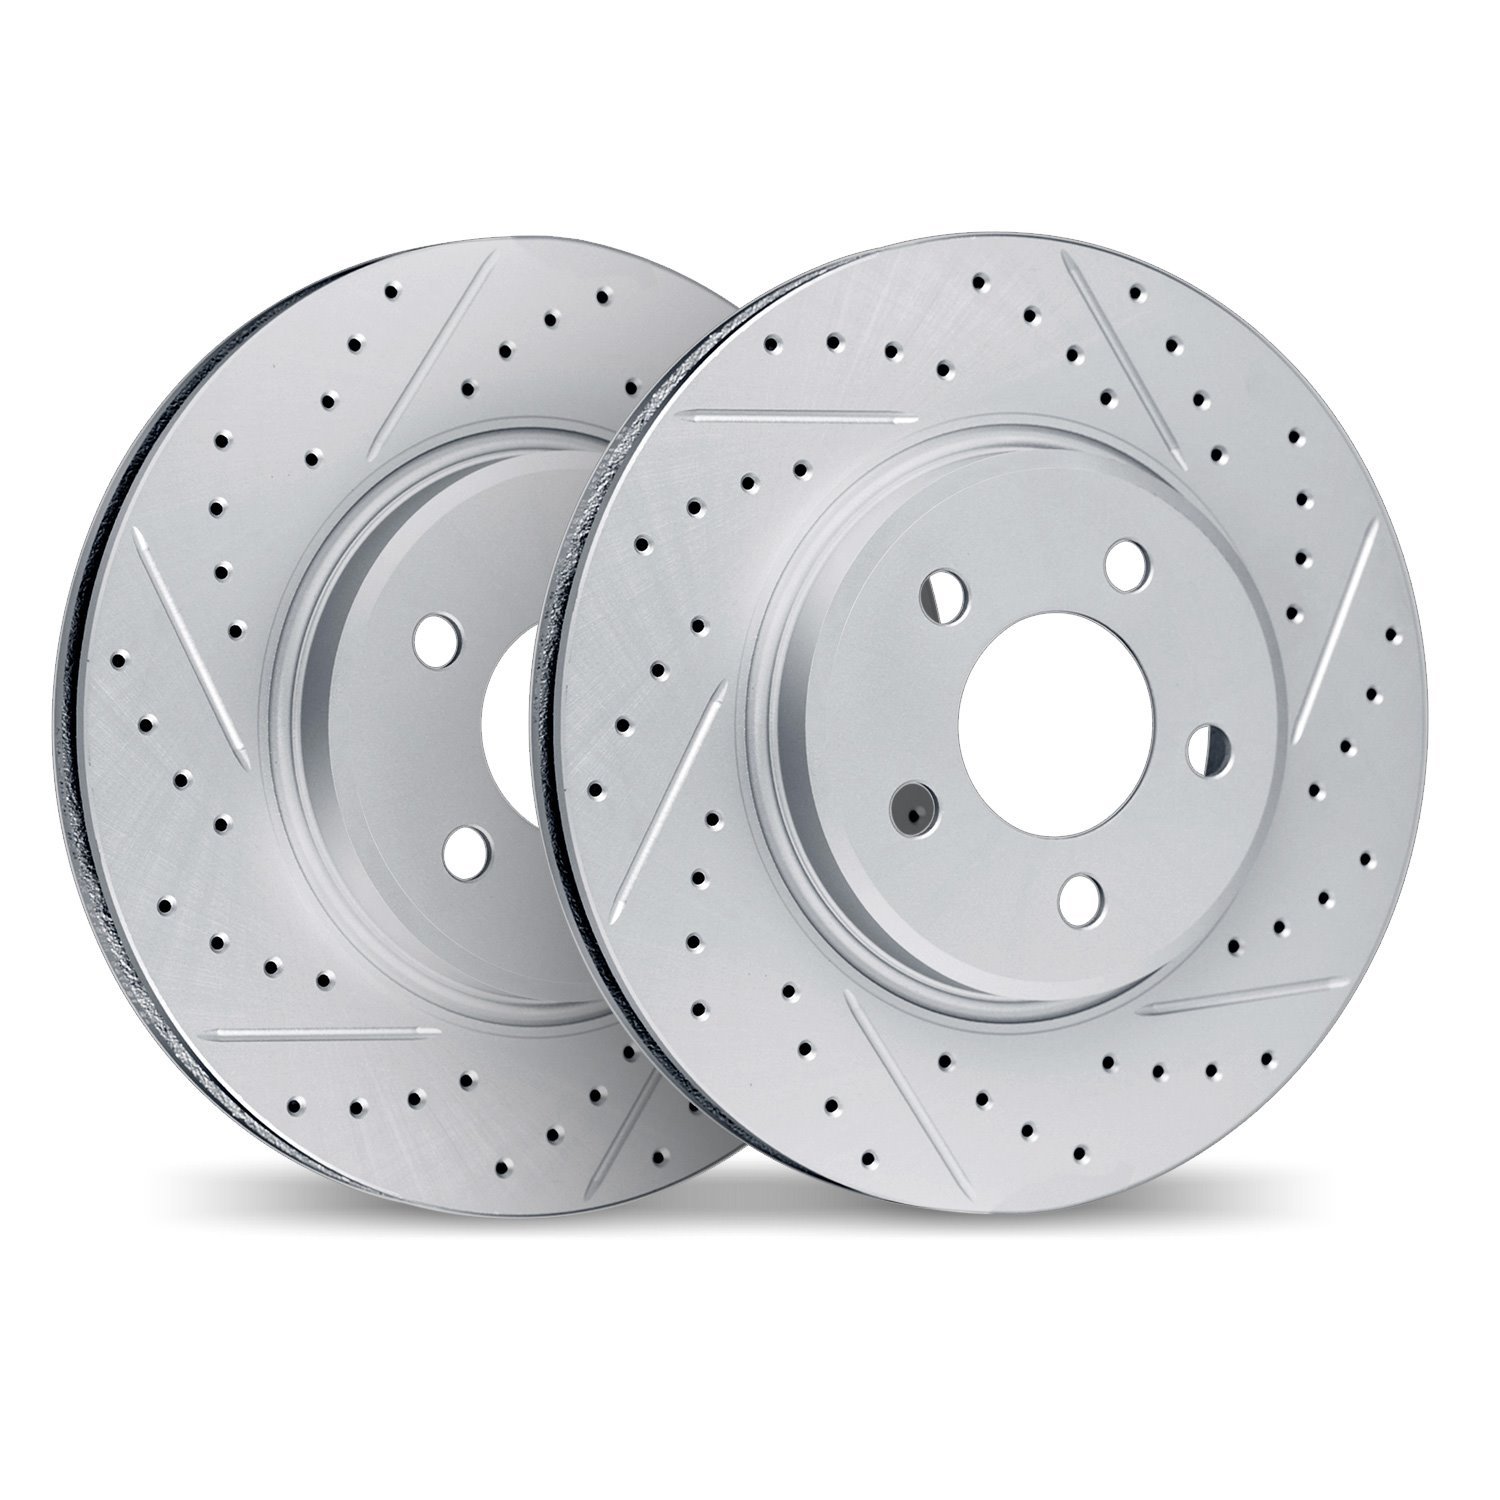 2002-45004 Geoperformance Drilled/Slotted Brake Rotors, 2016-2020 GM, Position: Front